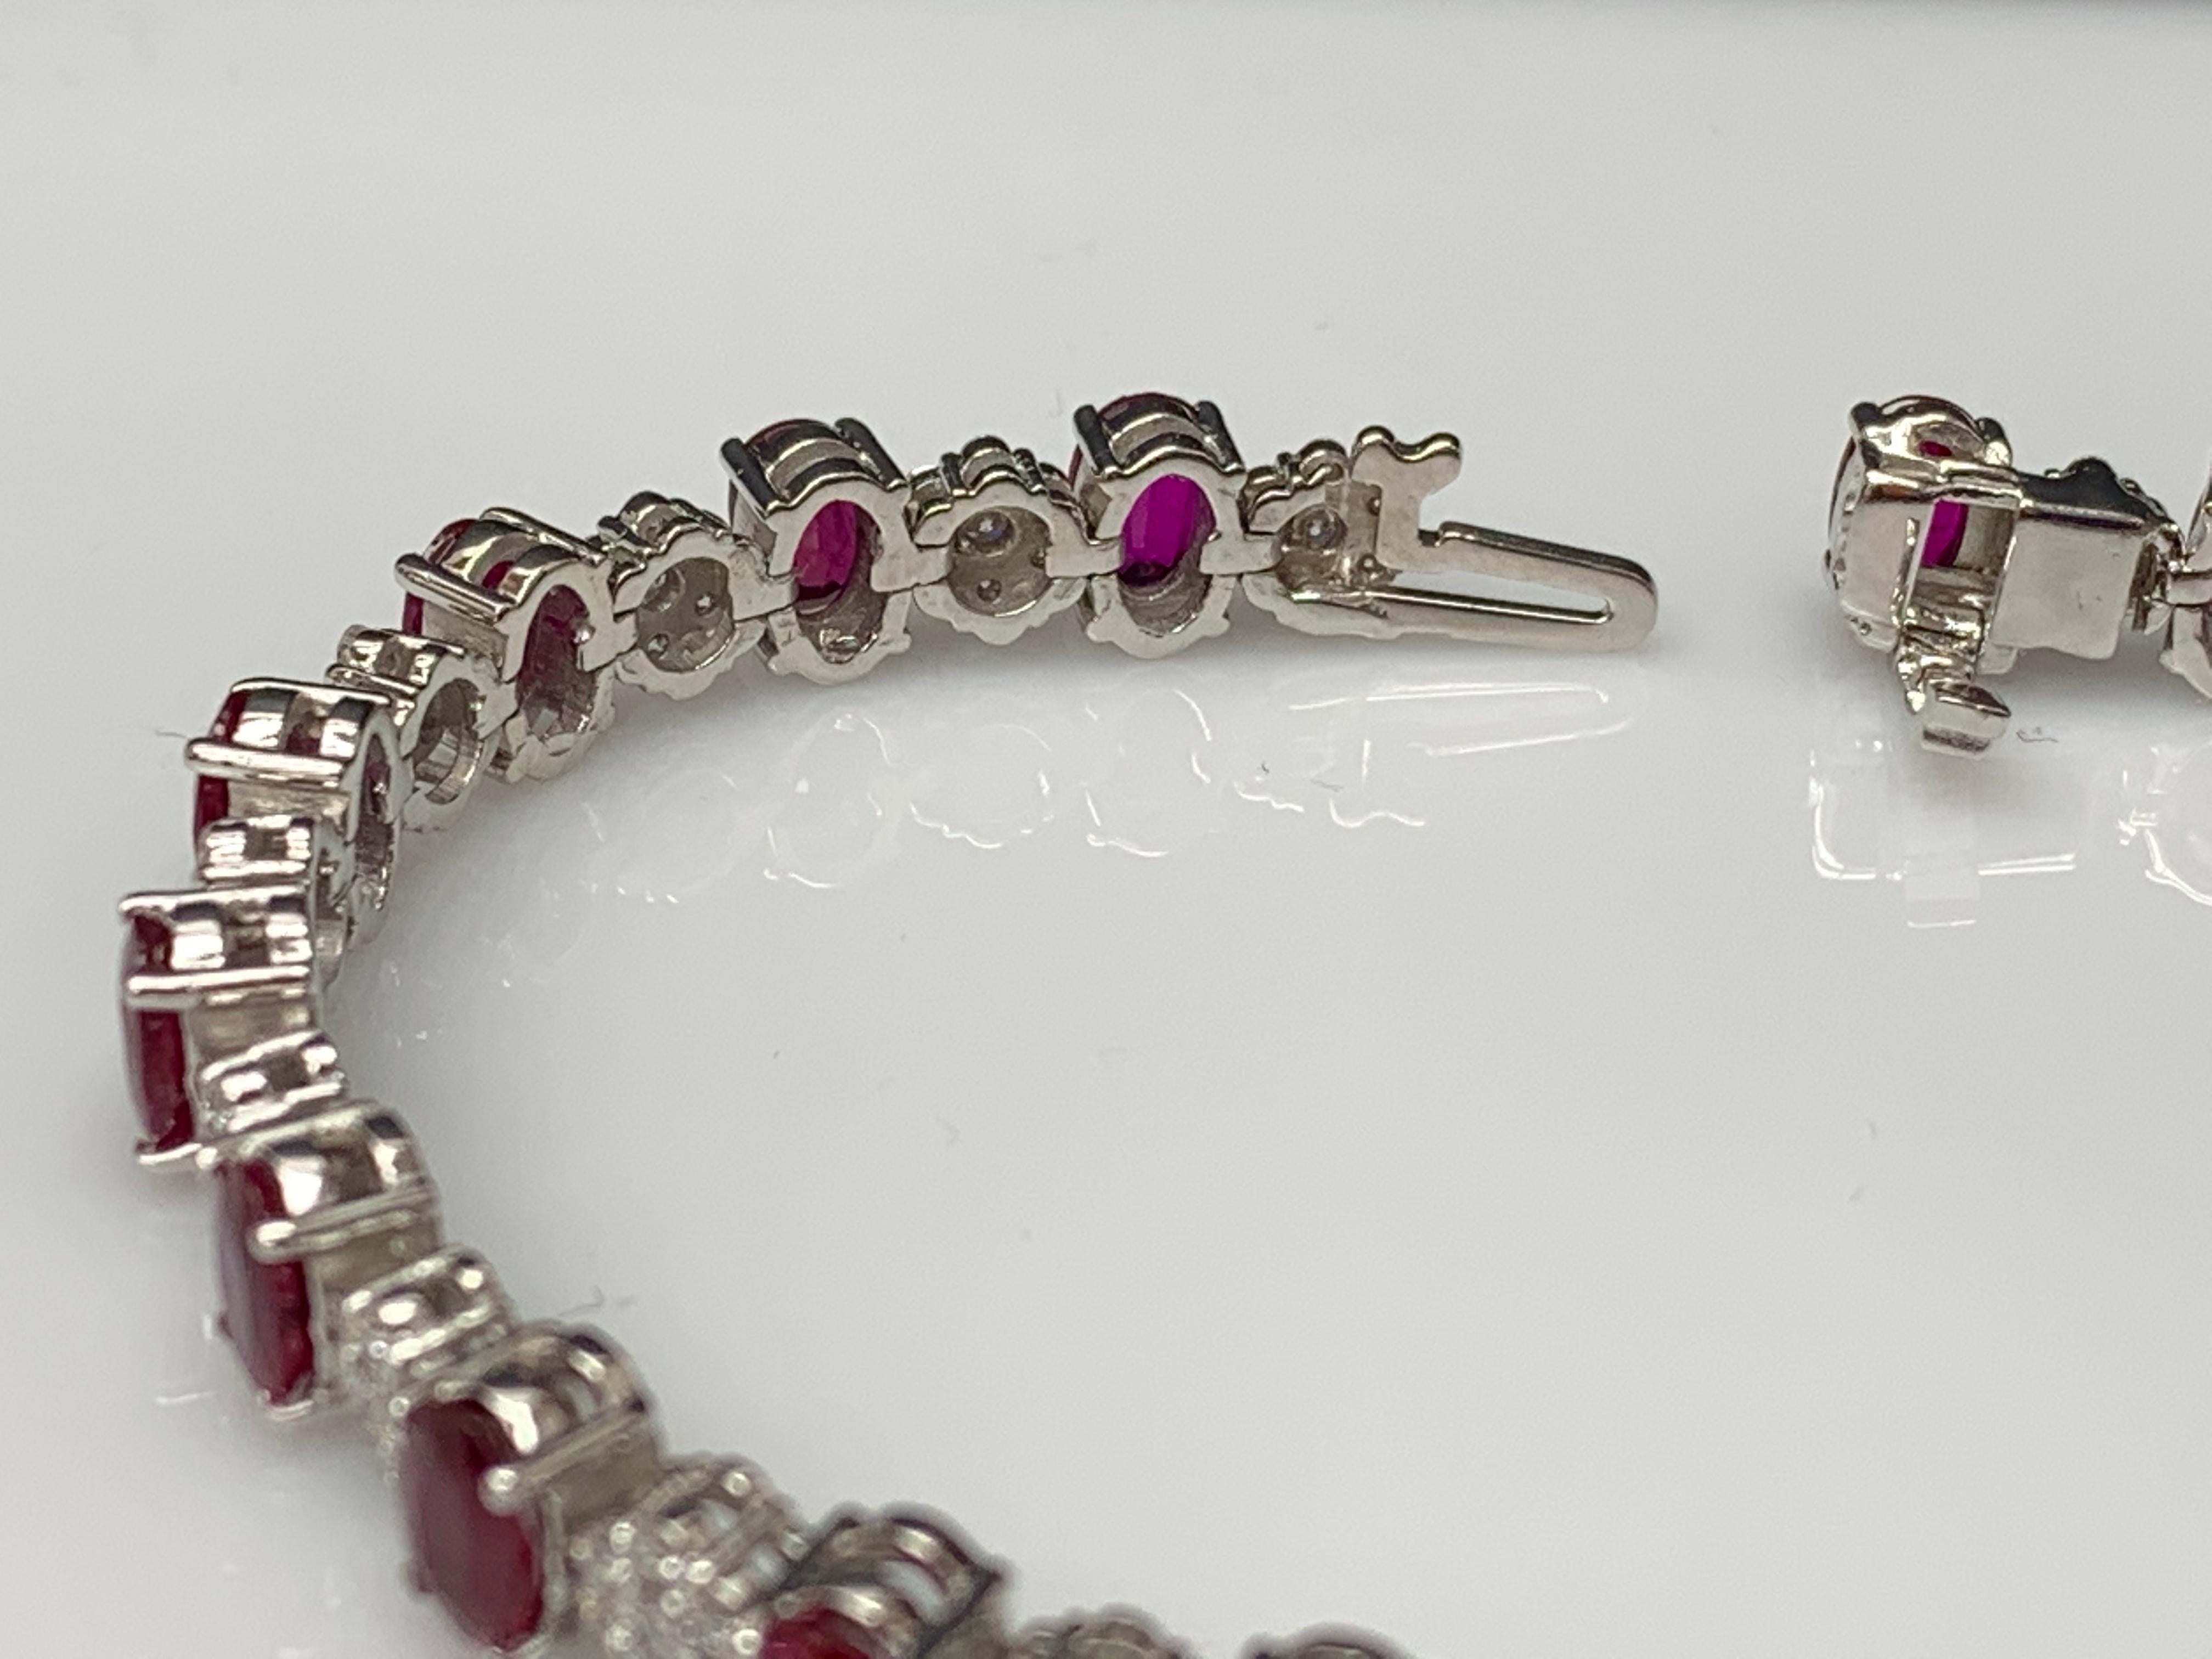 Modern 10.34 Carat Oval Cut Ruby and Diamond Tennis Bracelet in 14K White Gold For Sale